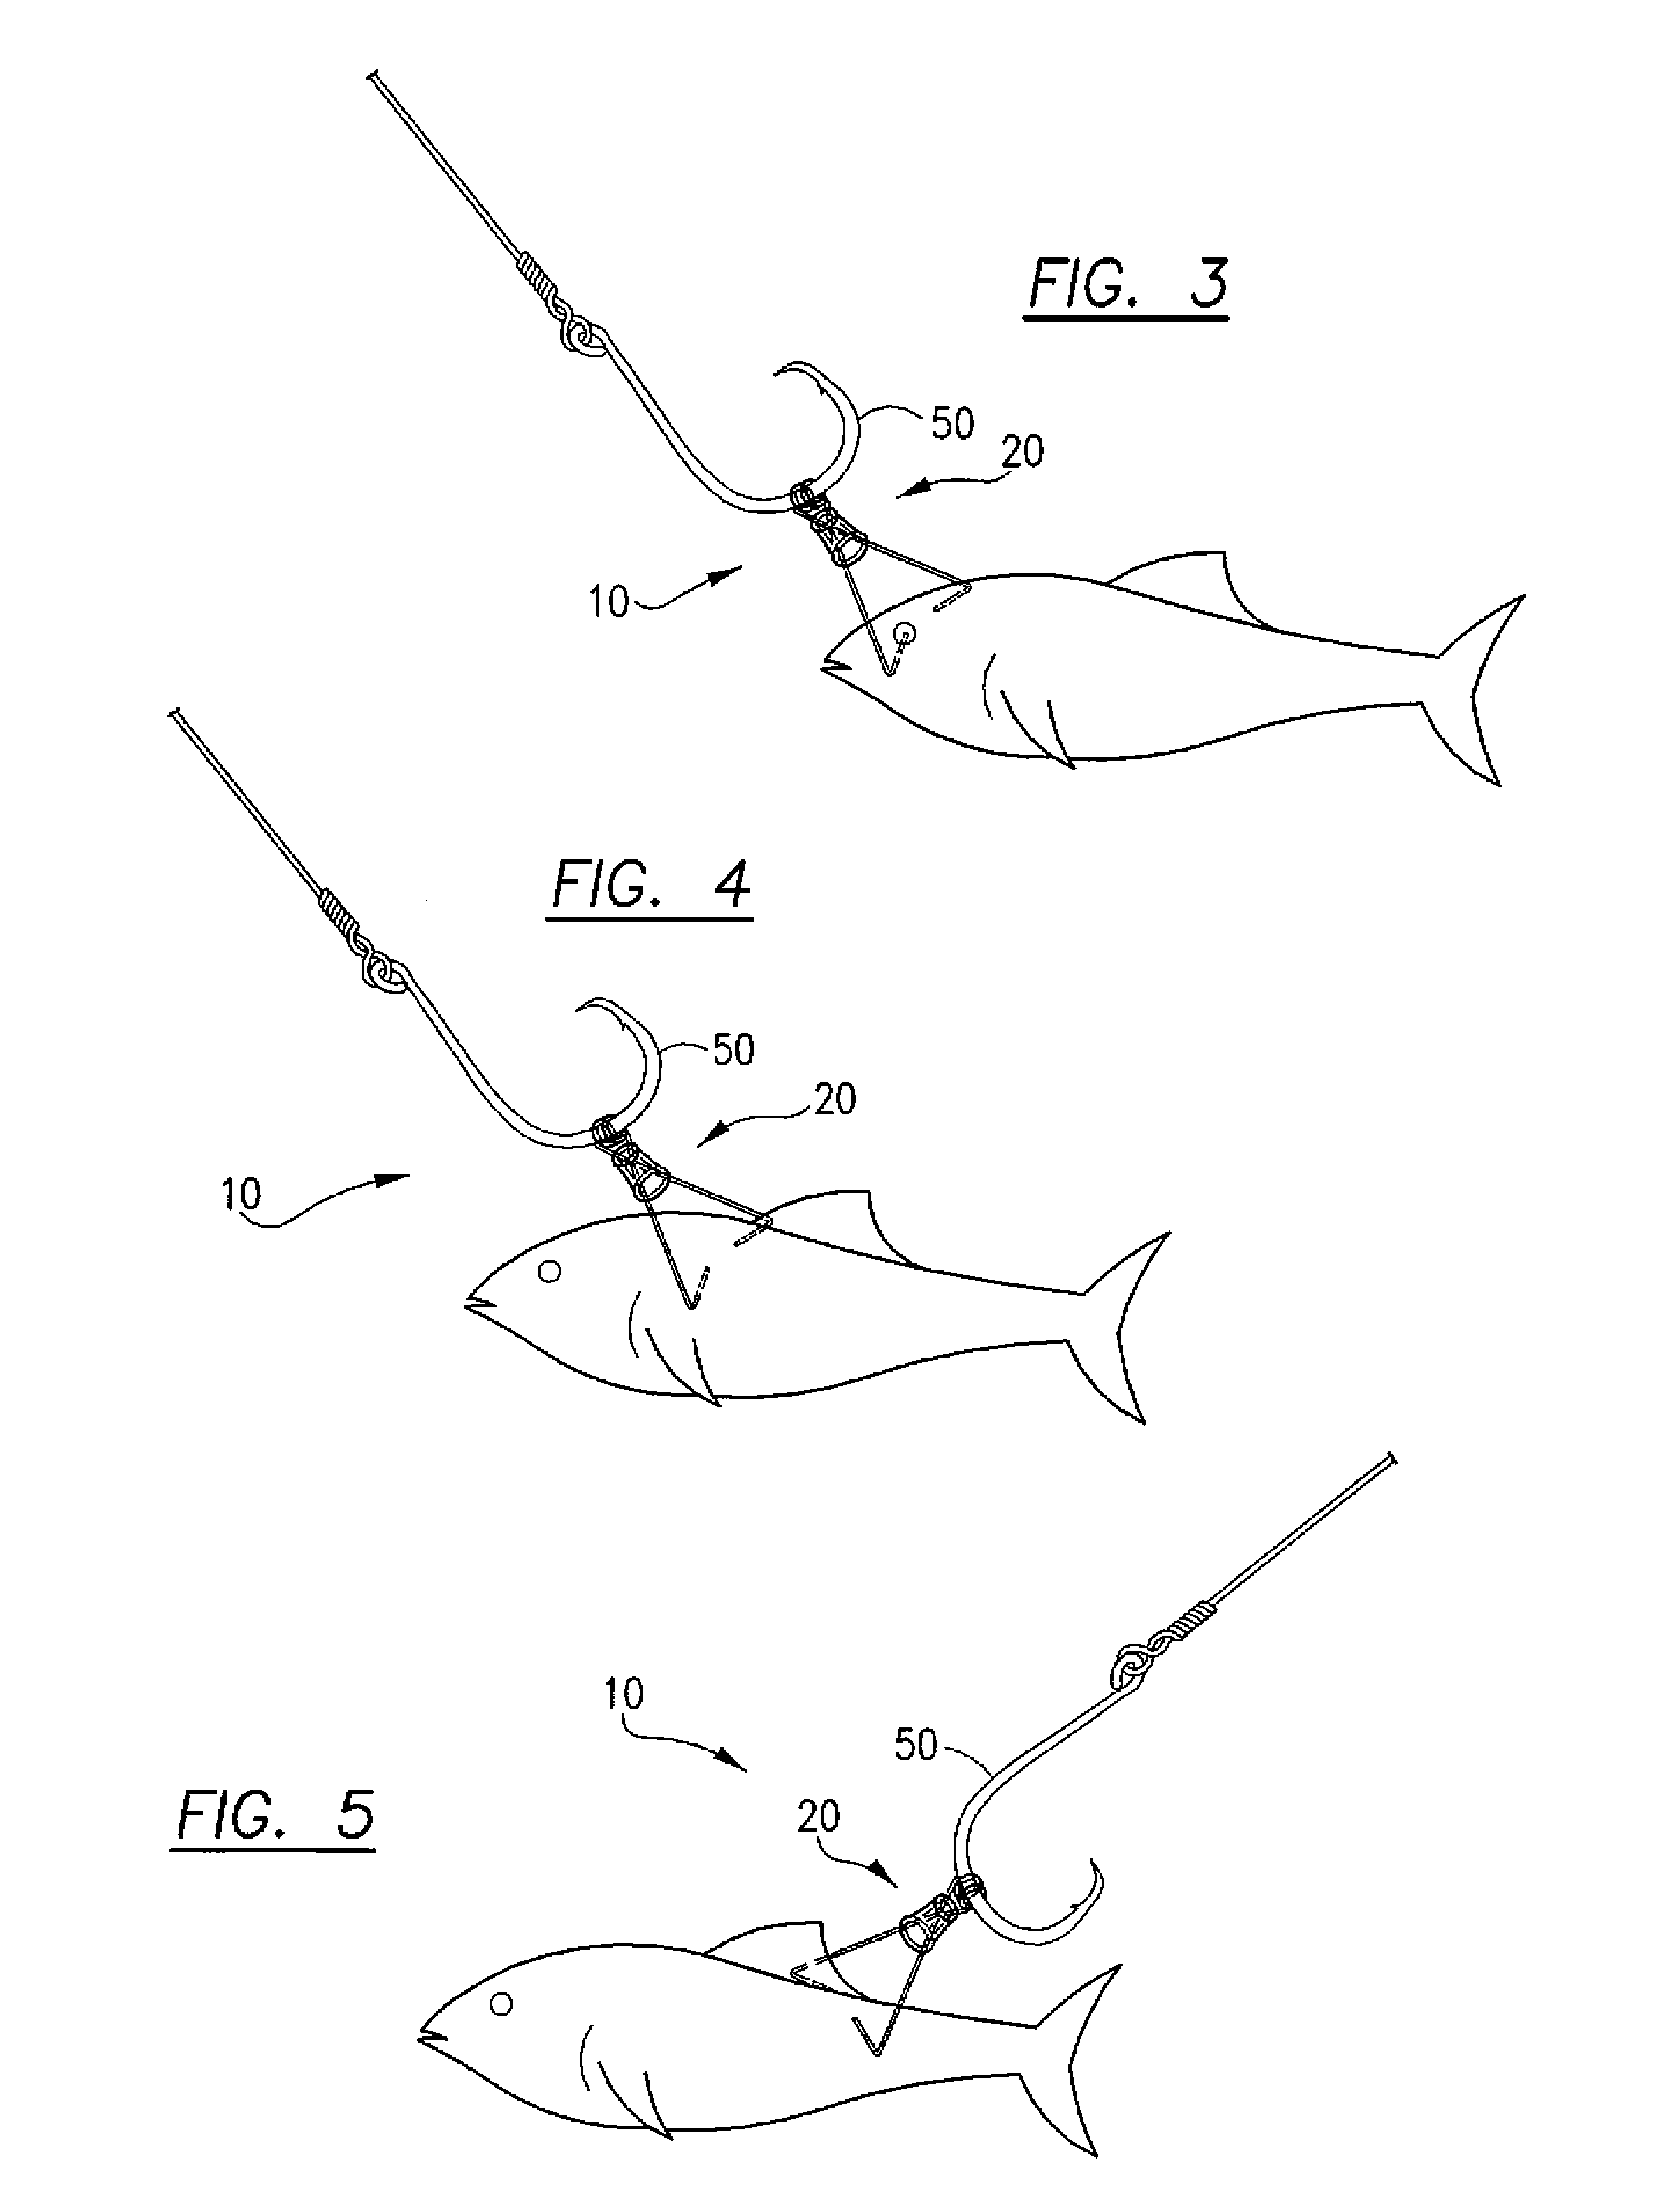 Apparatus and method for securing a bait fish to a fish hook